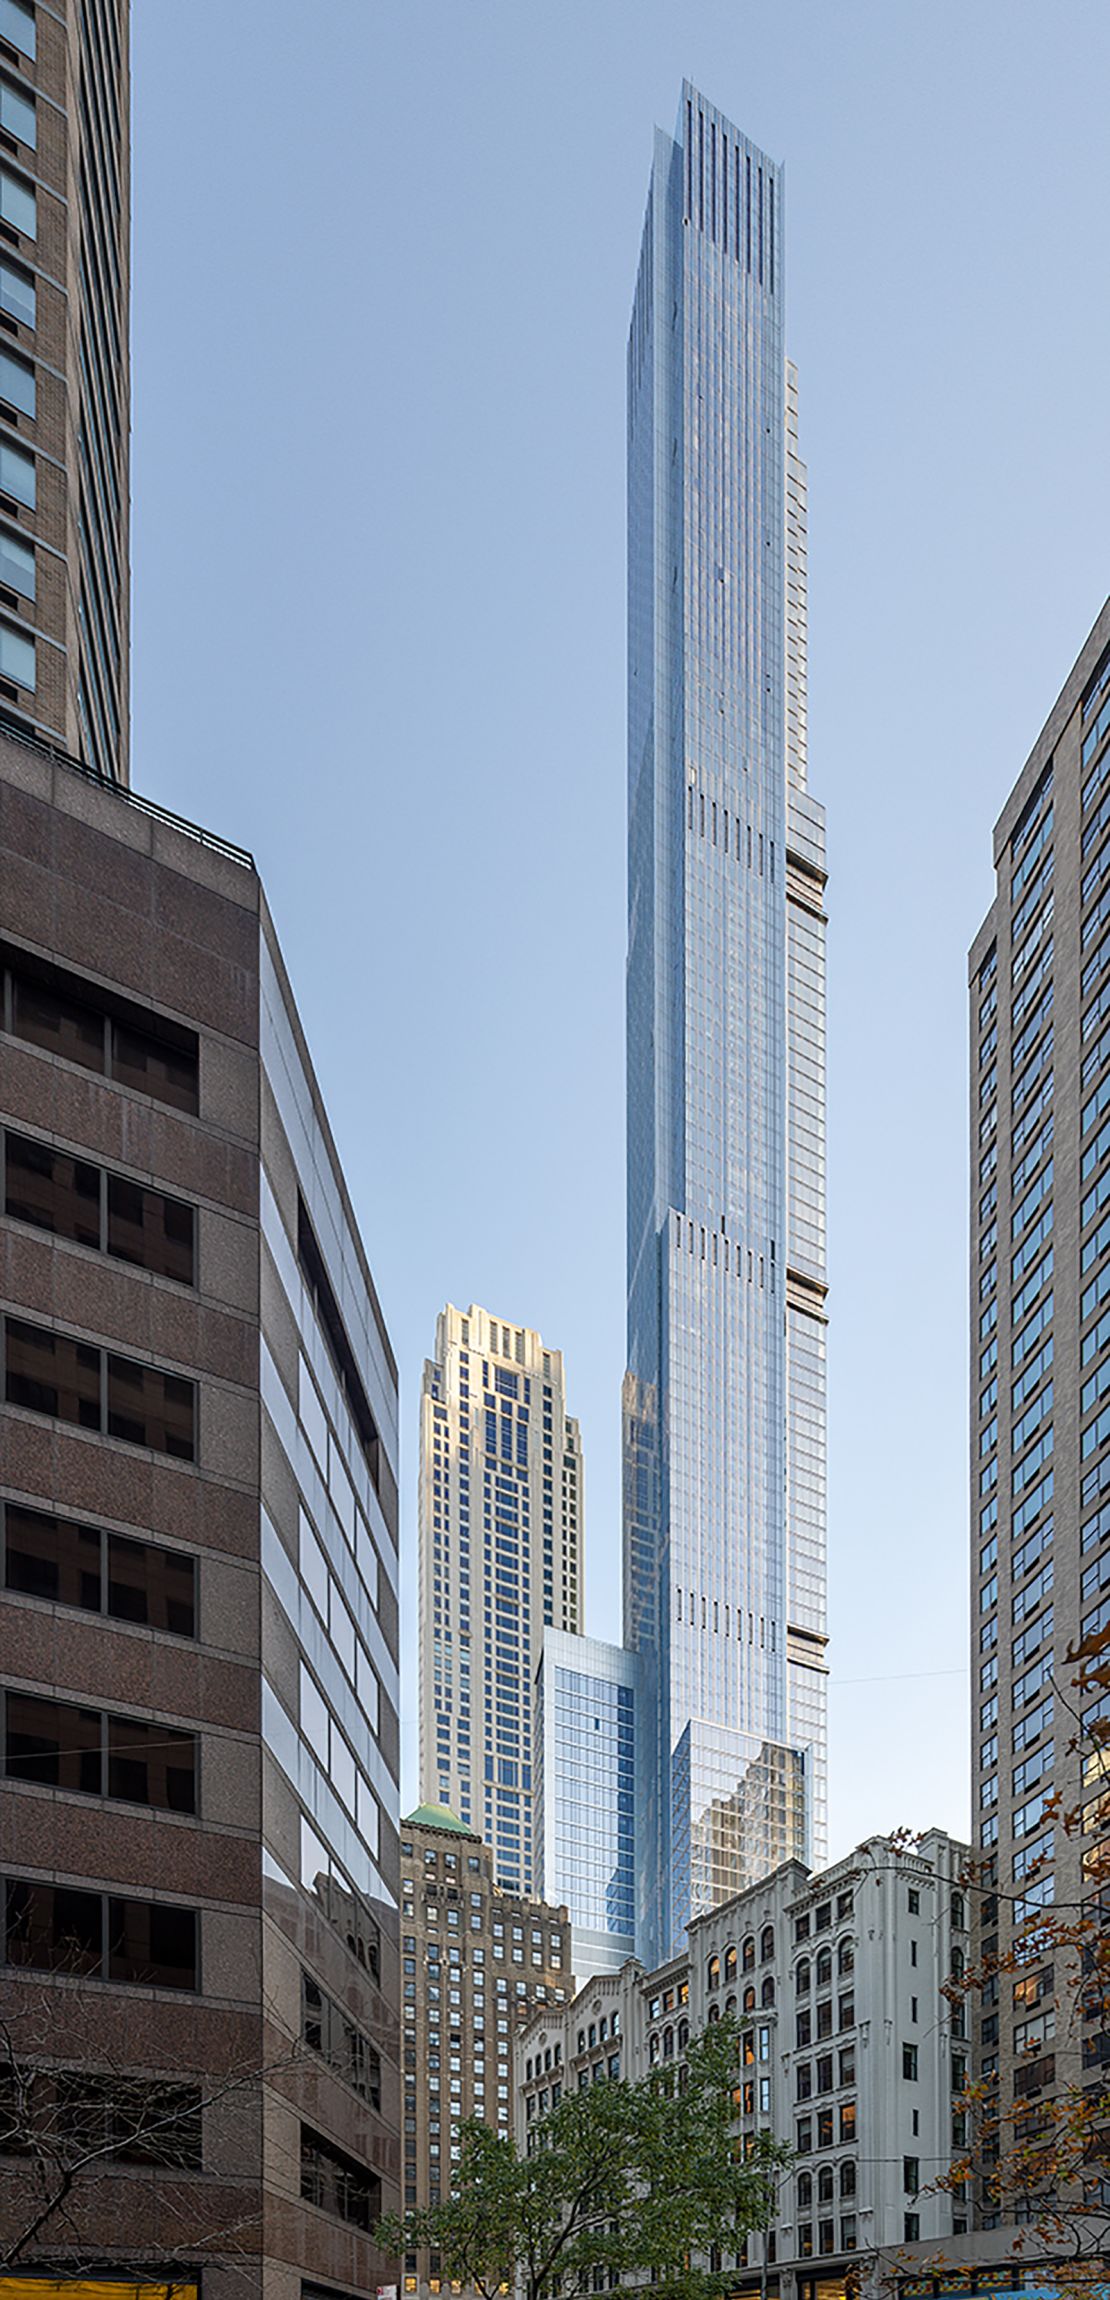 Last year's tallest new building, the 1,550-foot Central Park Tower in New York.